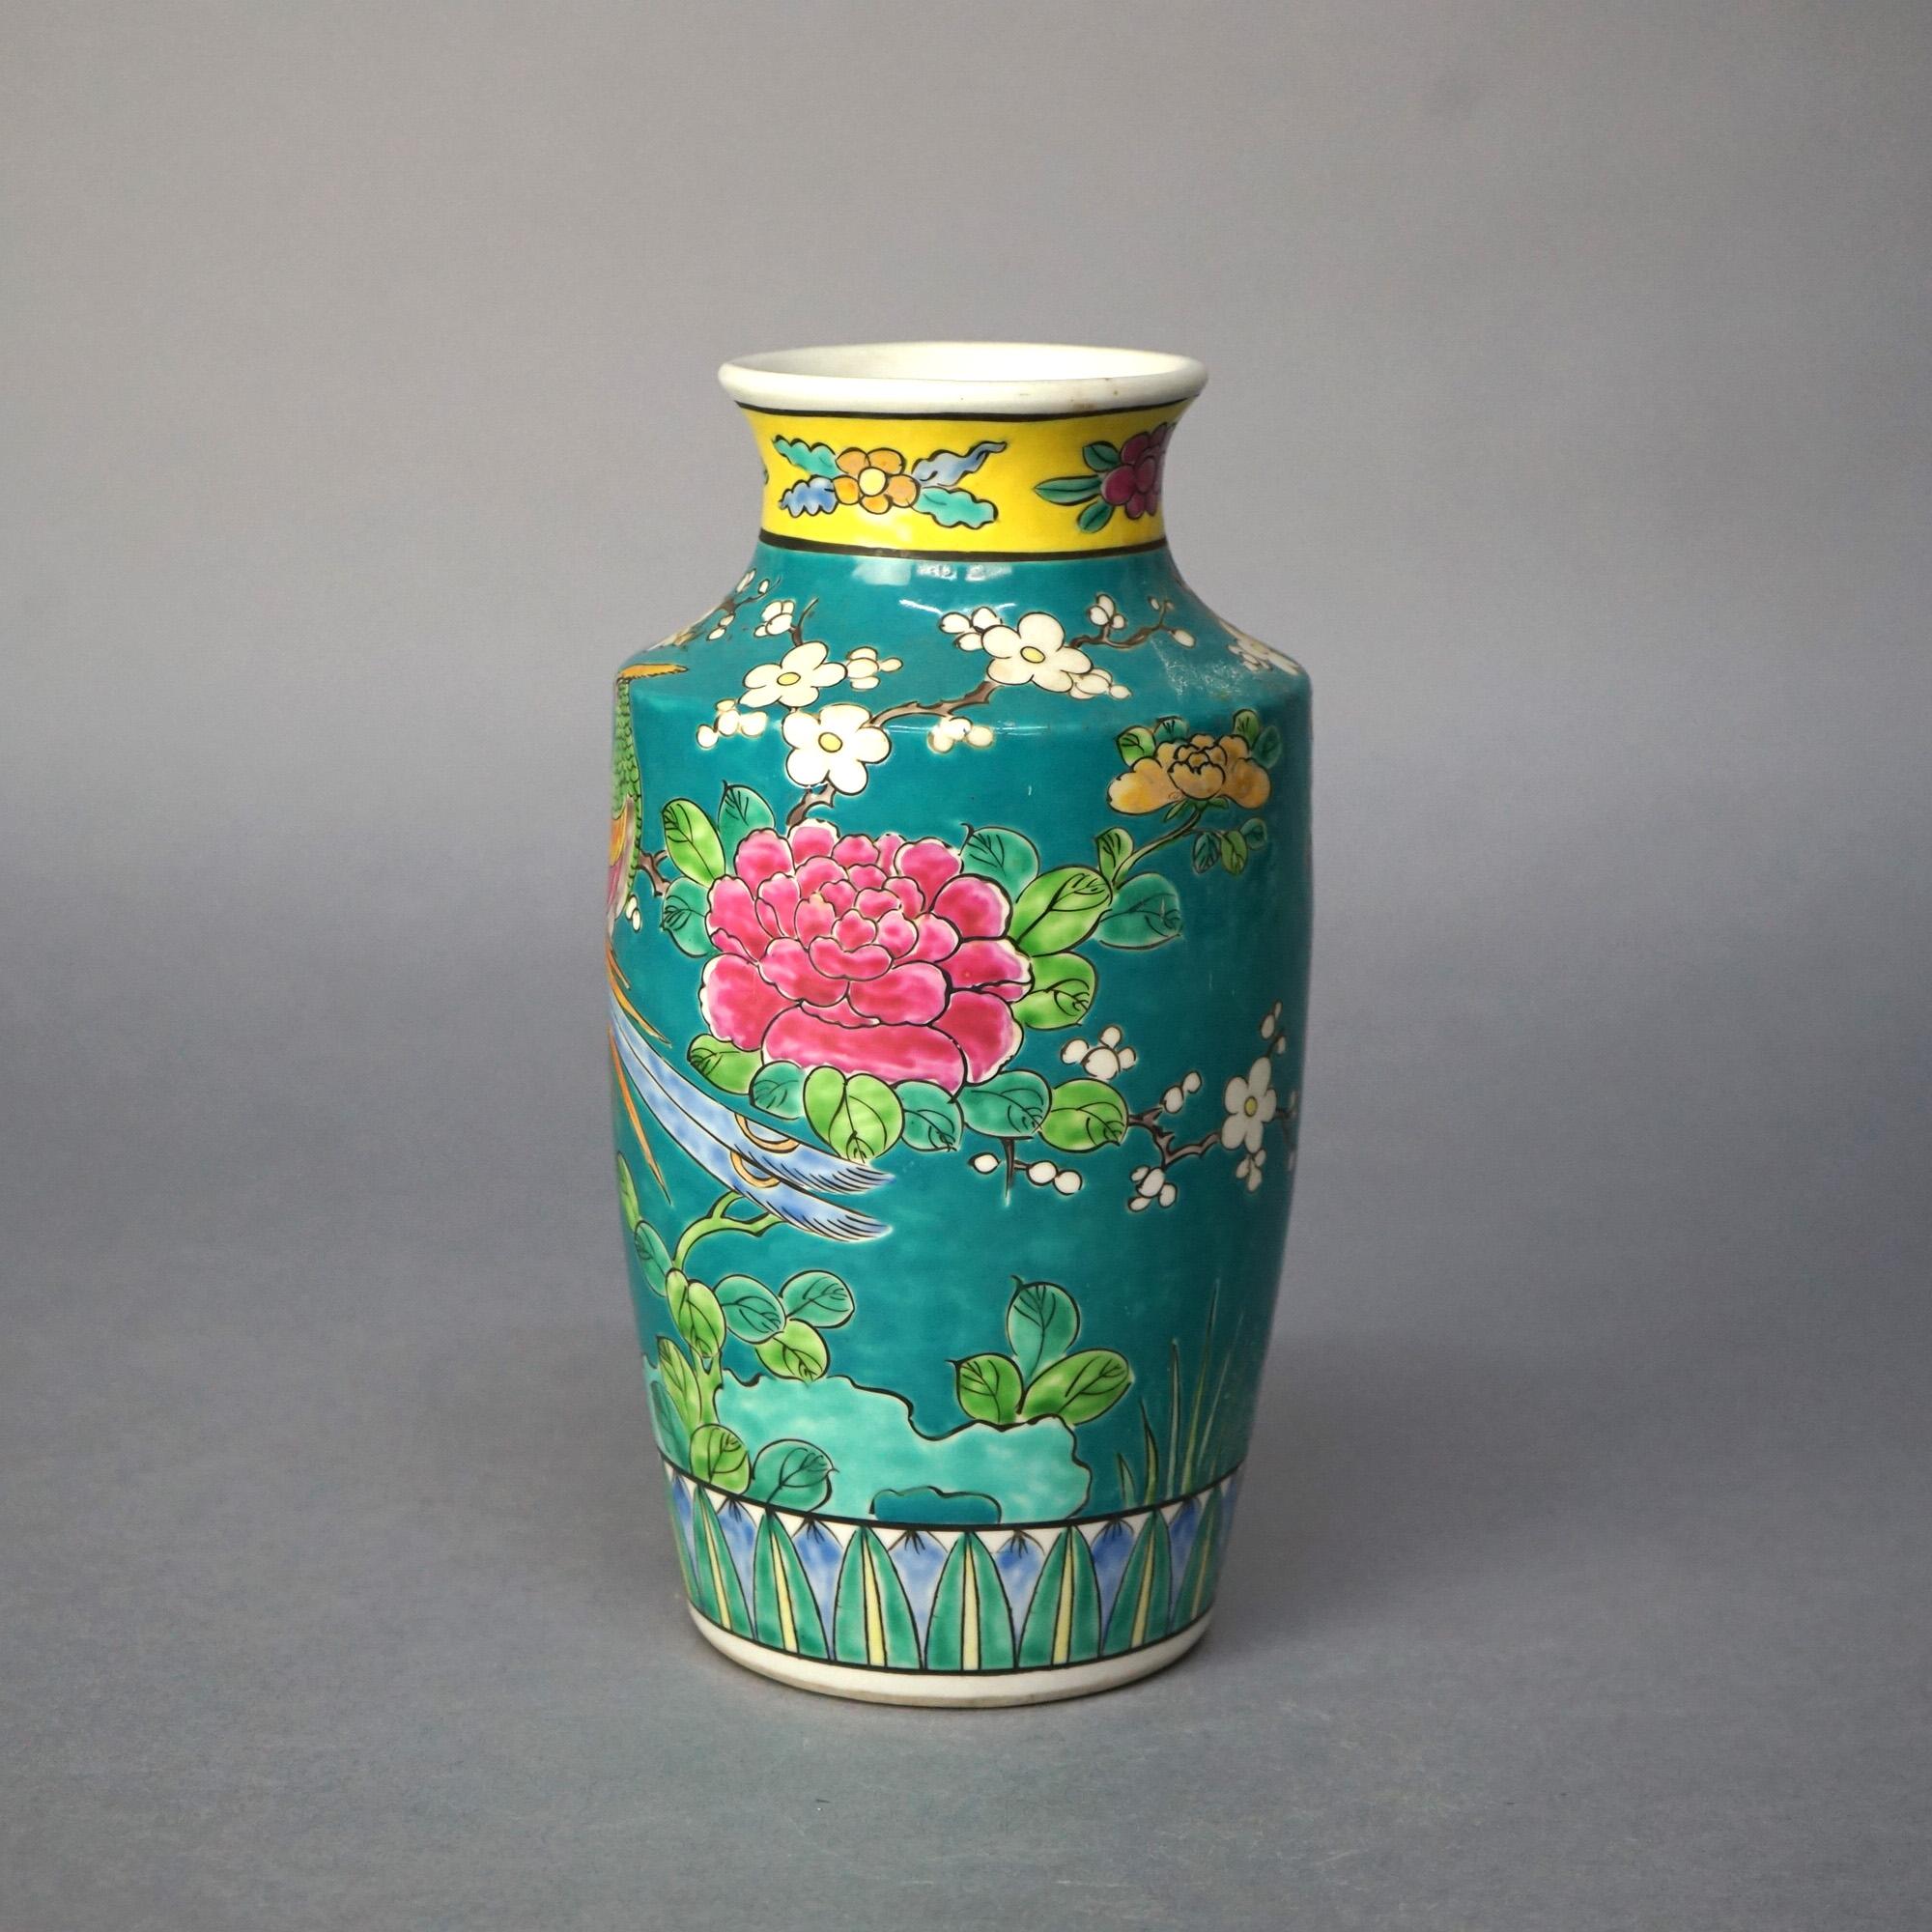 Antique Japanese Porcelain Enameled Garden Scene Vase with Birds & Flowers C1910 In Good Condition For Sale In Big Flats, NY